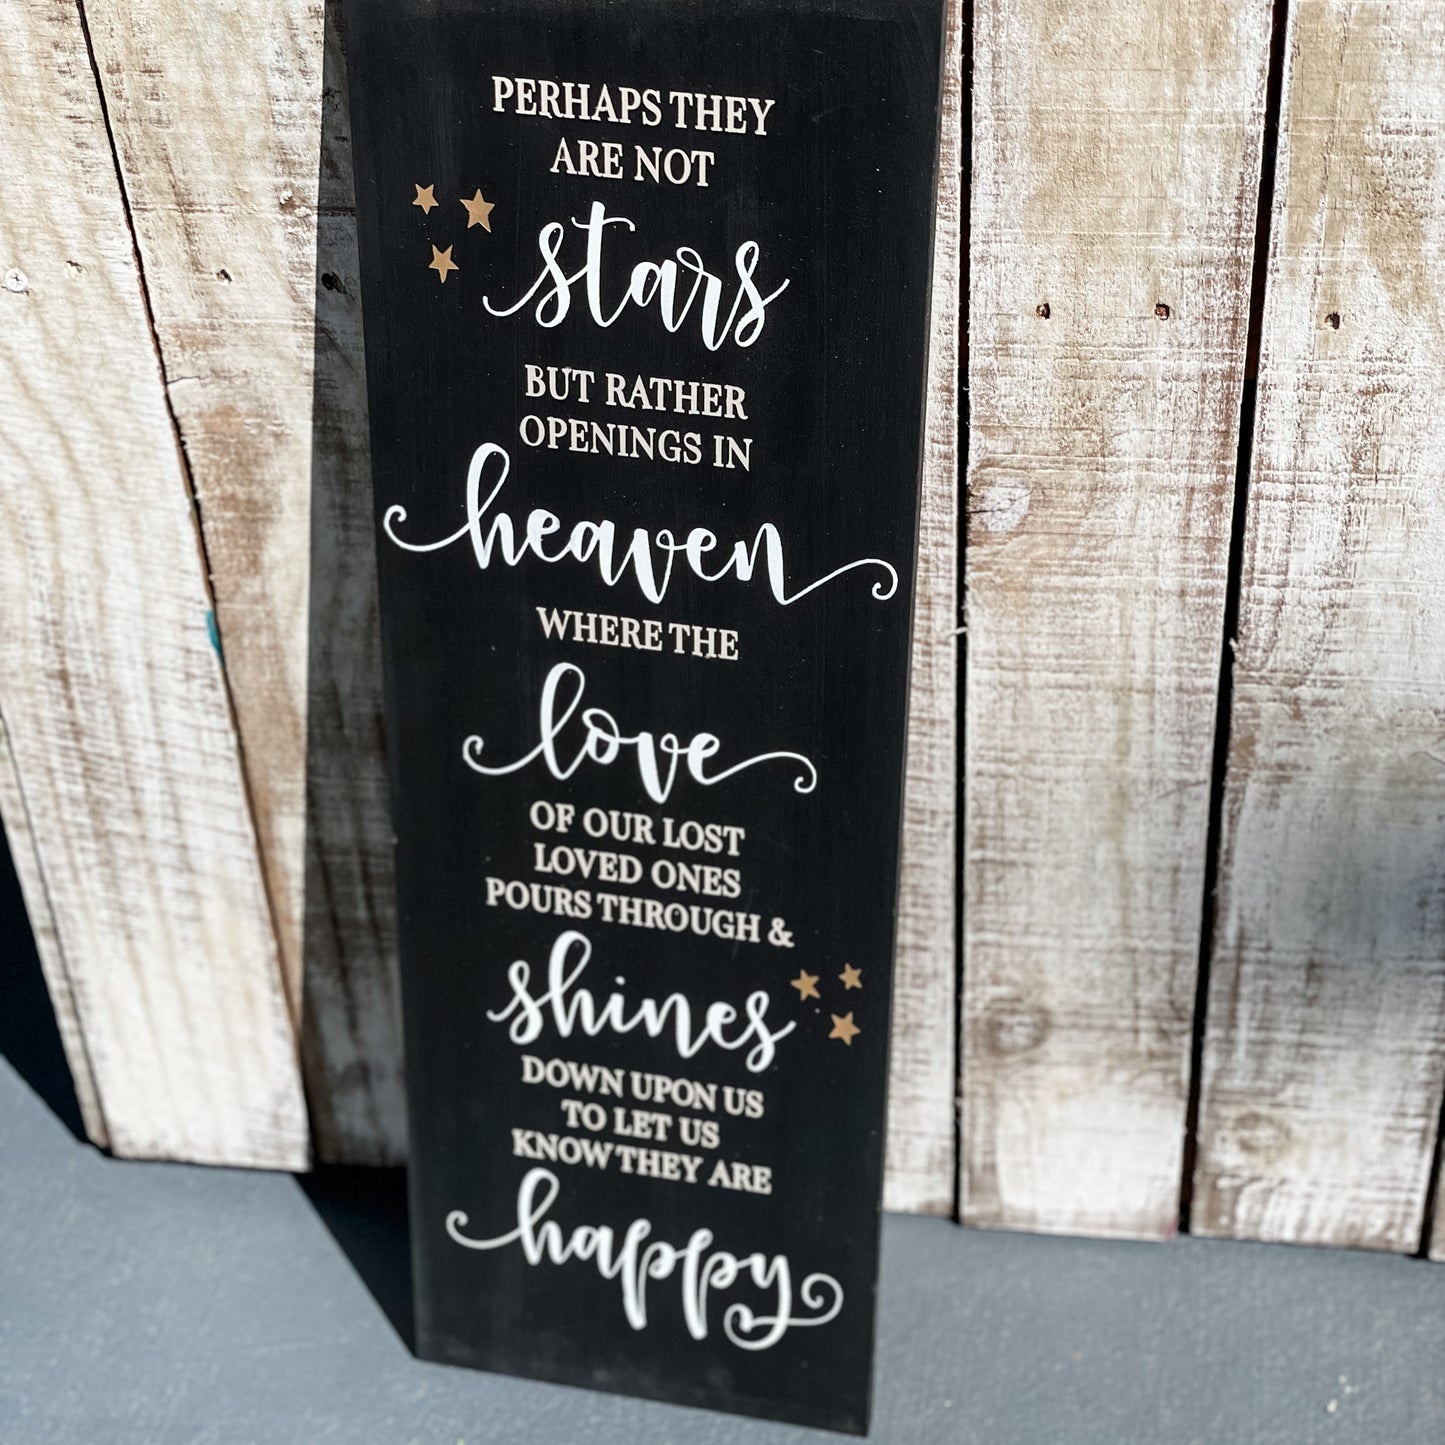 Perhaps They are Not Stars but Rather Openings in Heaven: Plank Design - Paisley Grace Makery